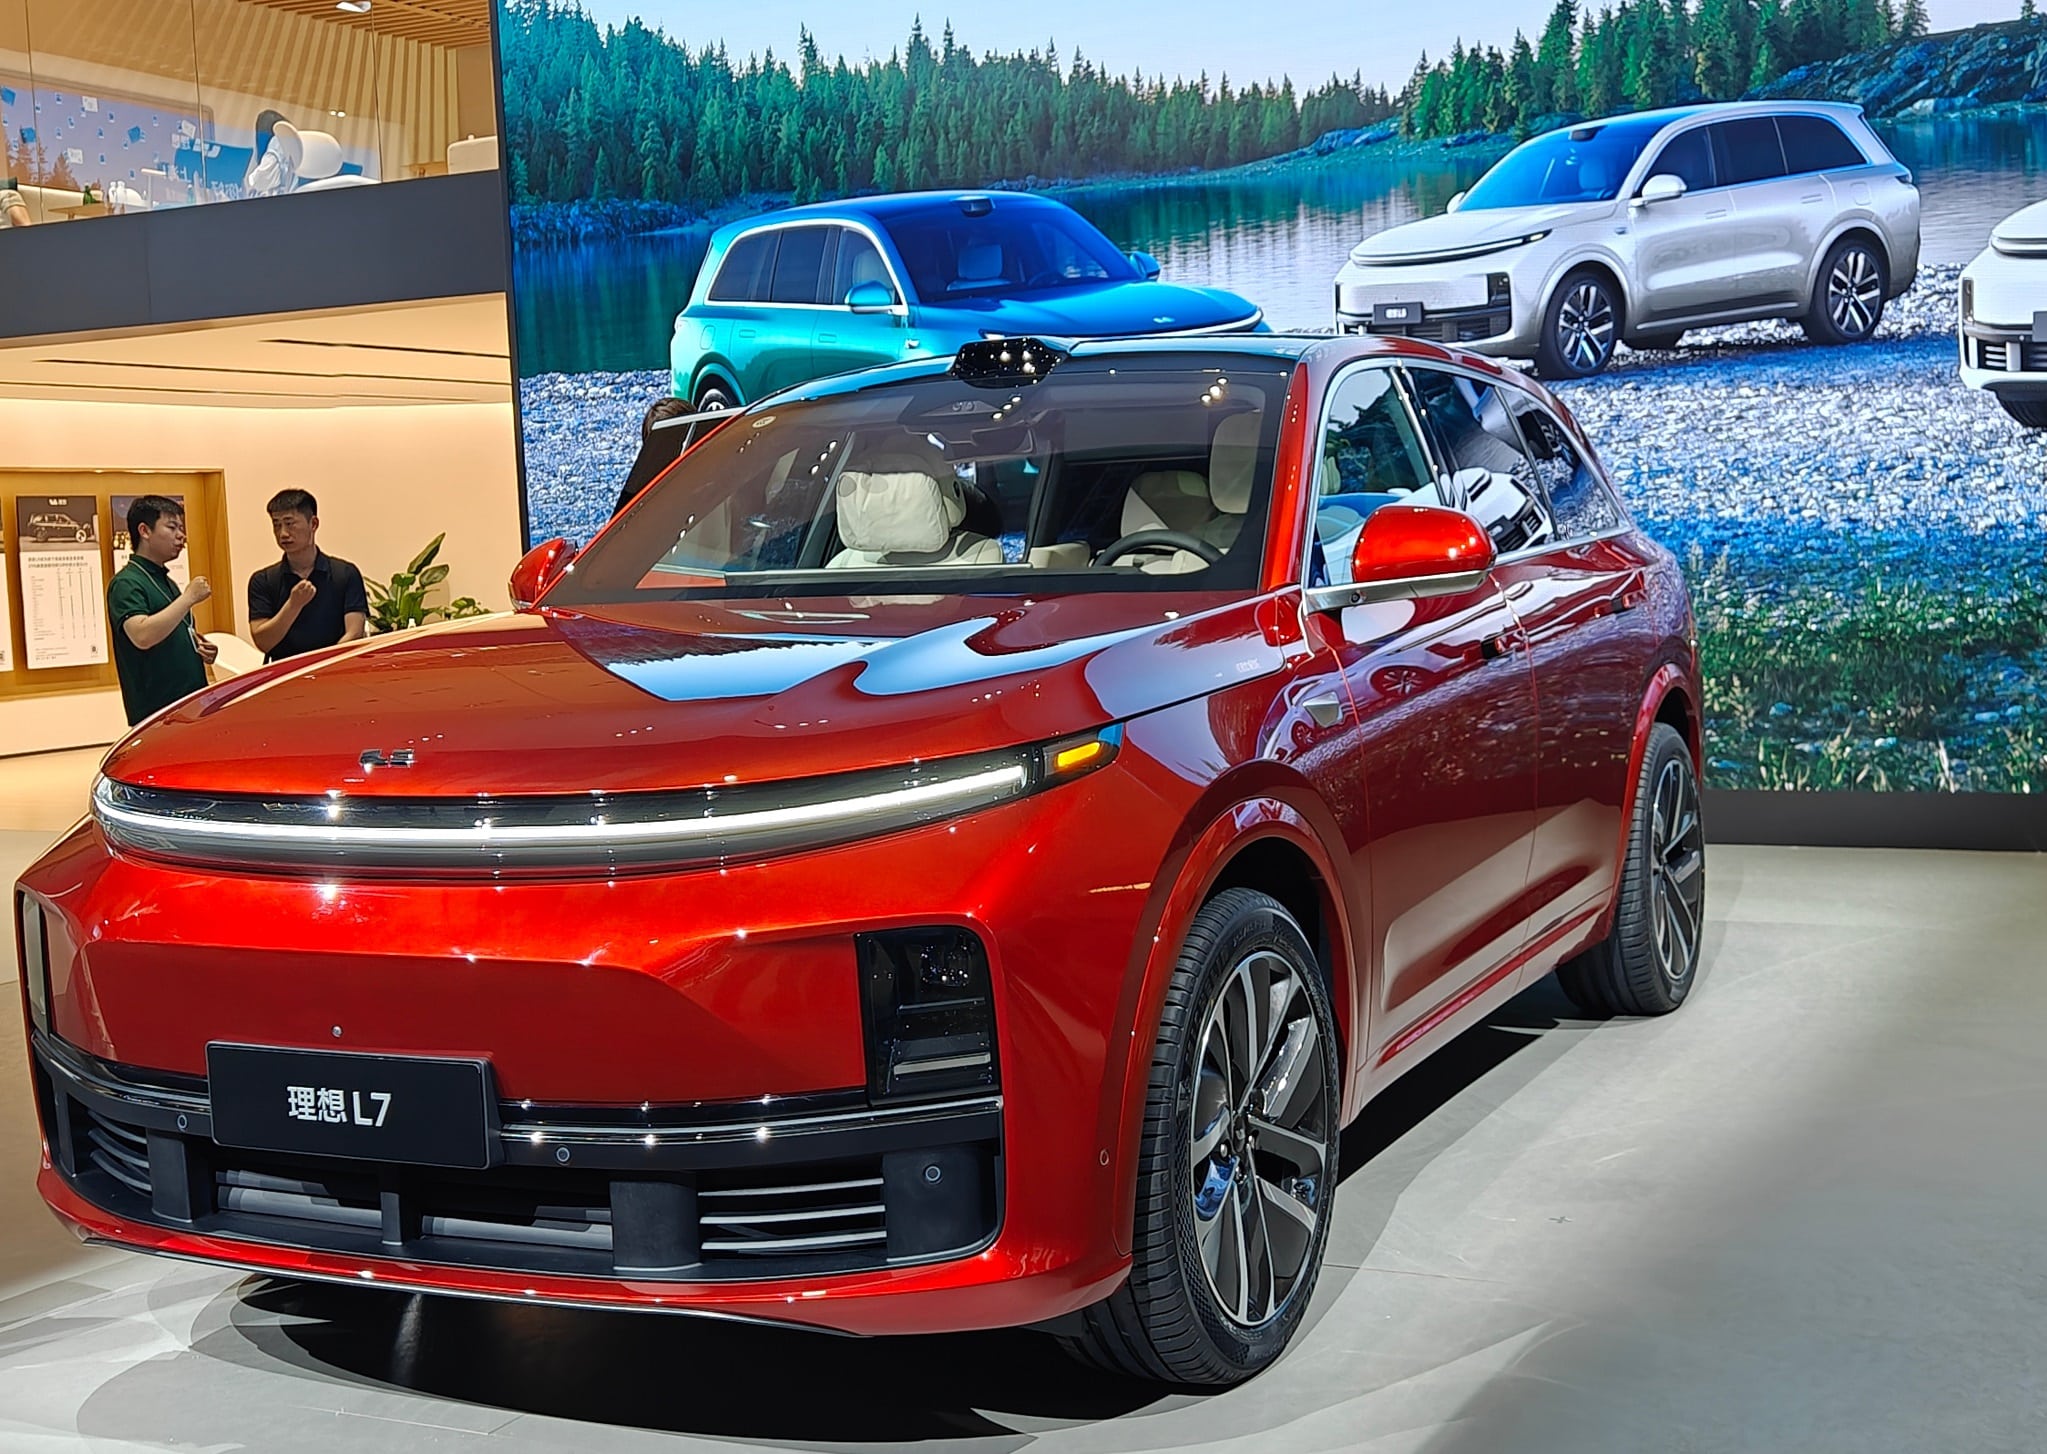 Li Auto's first pure EV will get CATL's Qilin battery. To launch 5 BEV